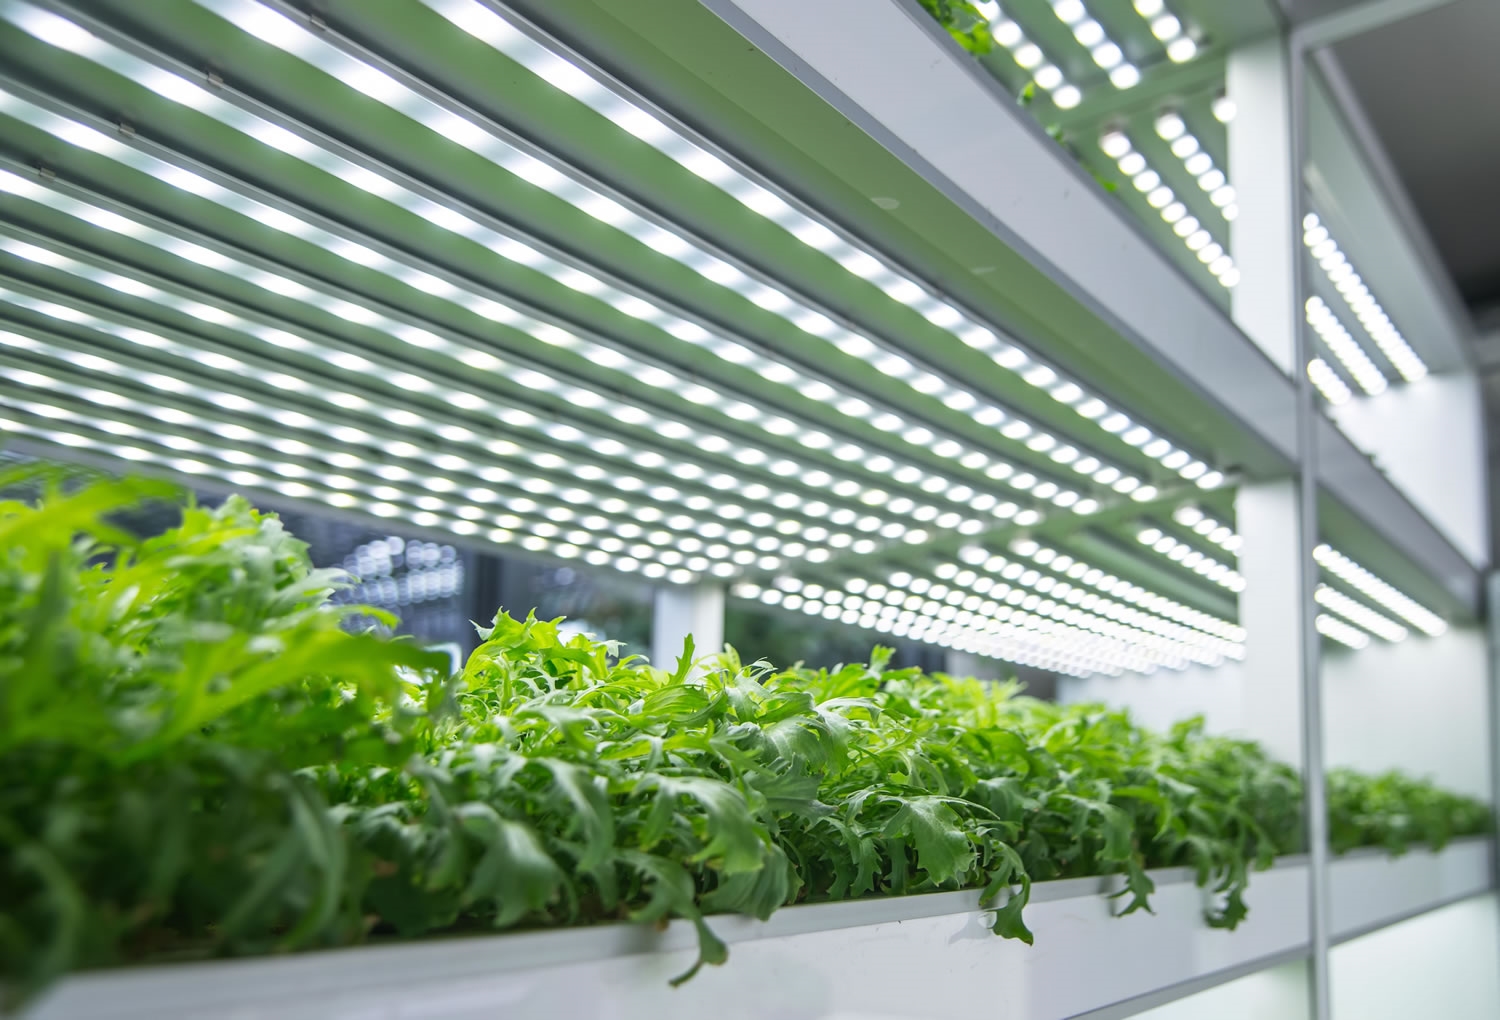 Case Study: Conformal Coating Improves Reliability of Grow Lights without Affecting Light Properties - Banner